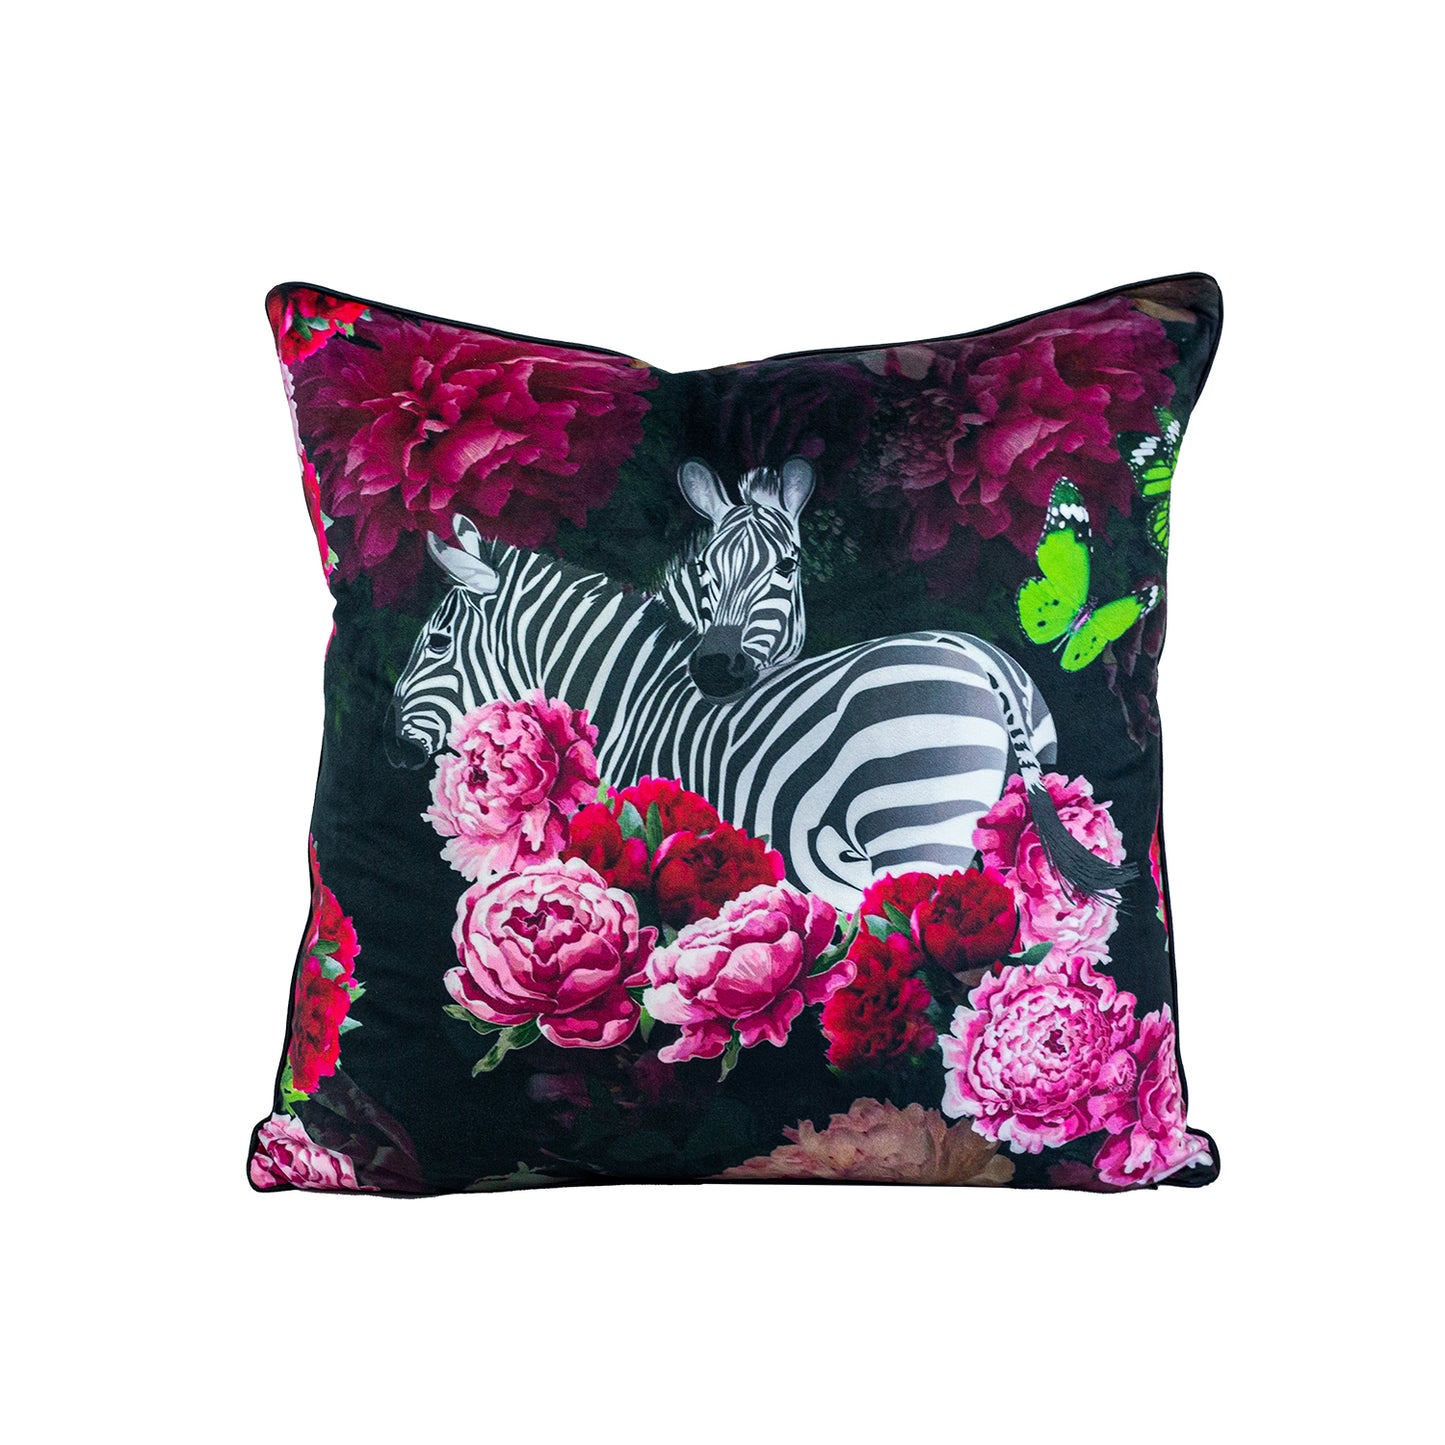 vibrant zebra and rose floral pattern witih butterflies on a black cushion